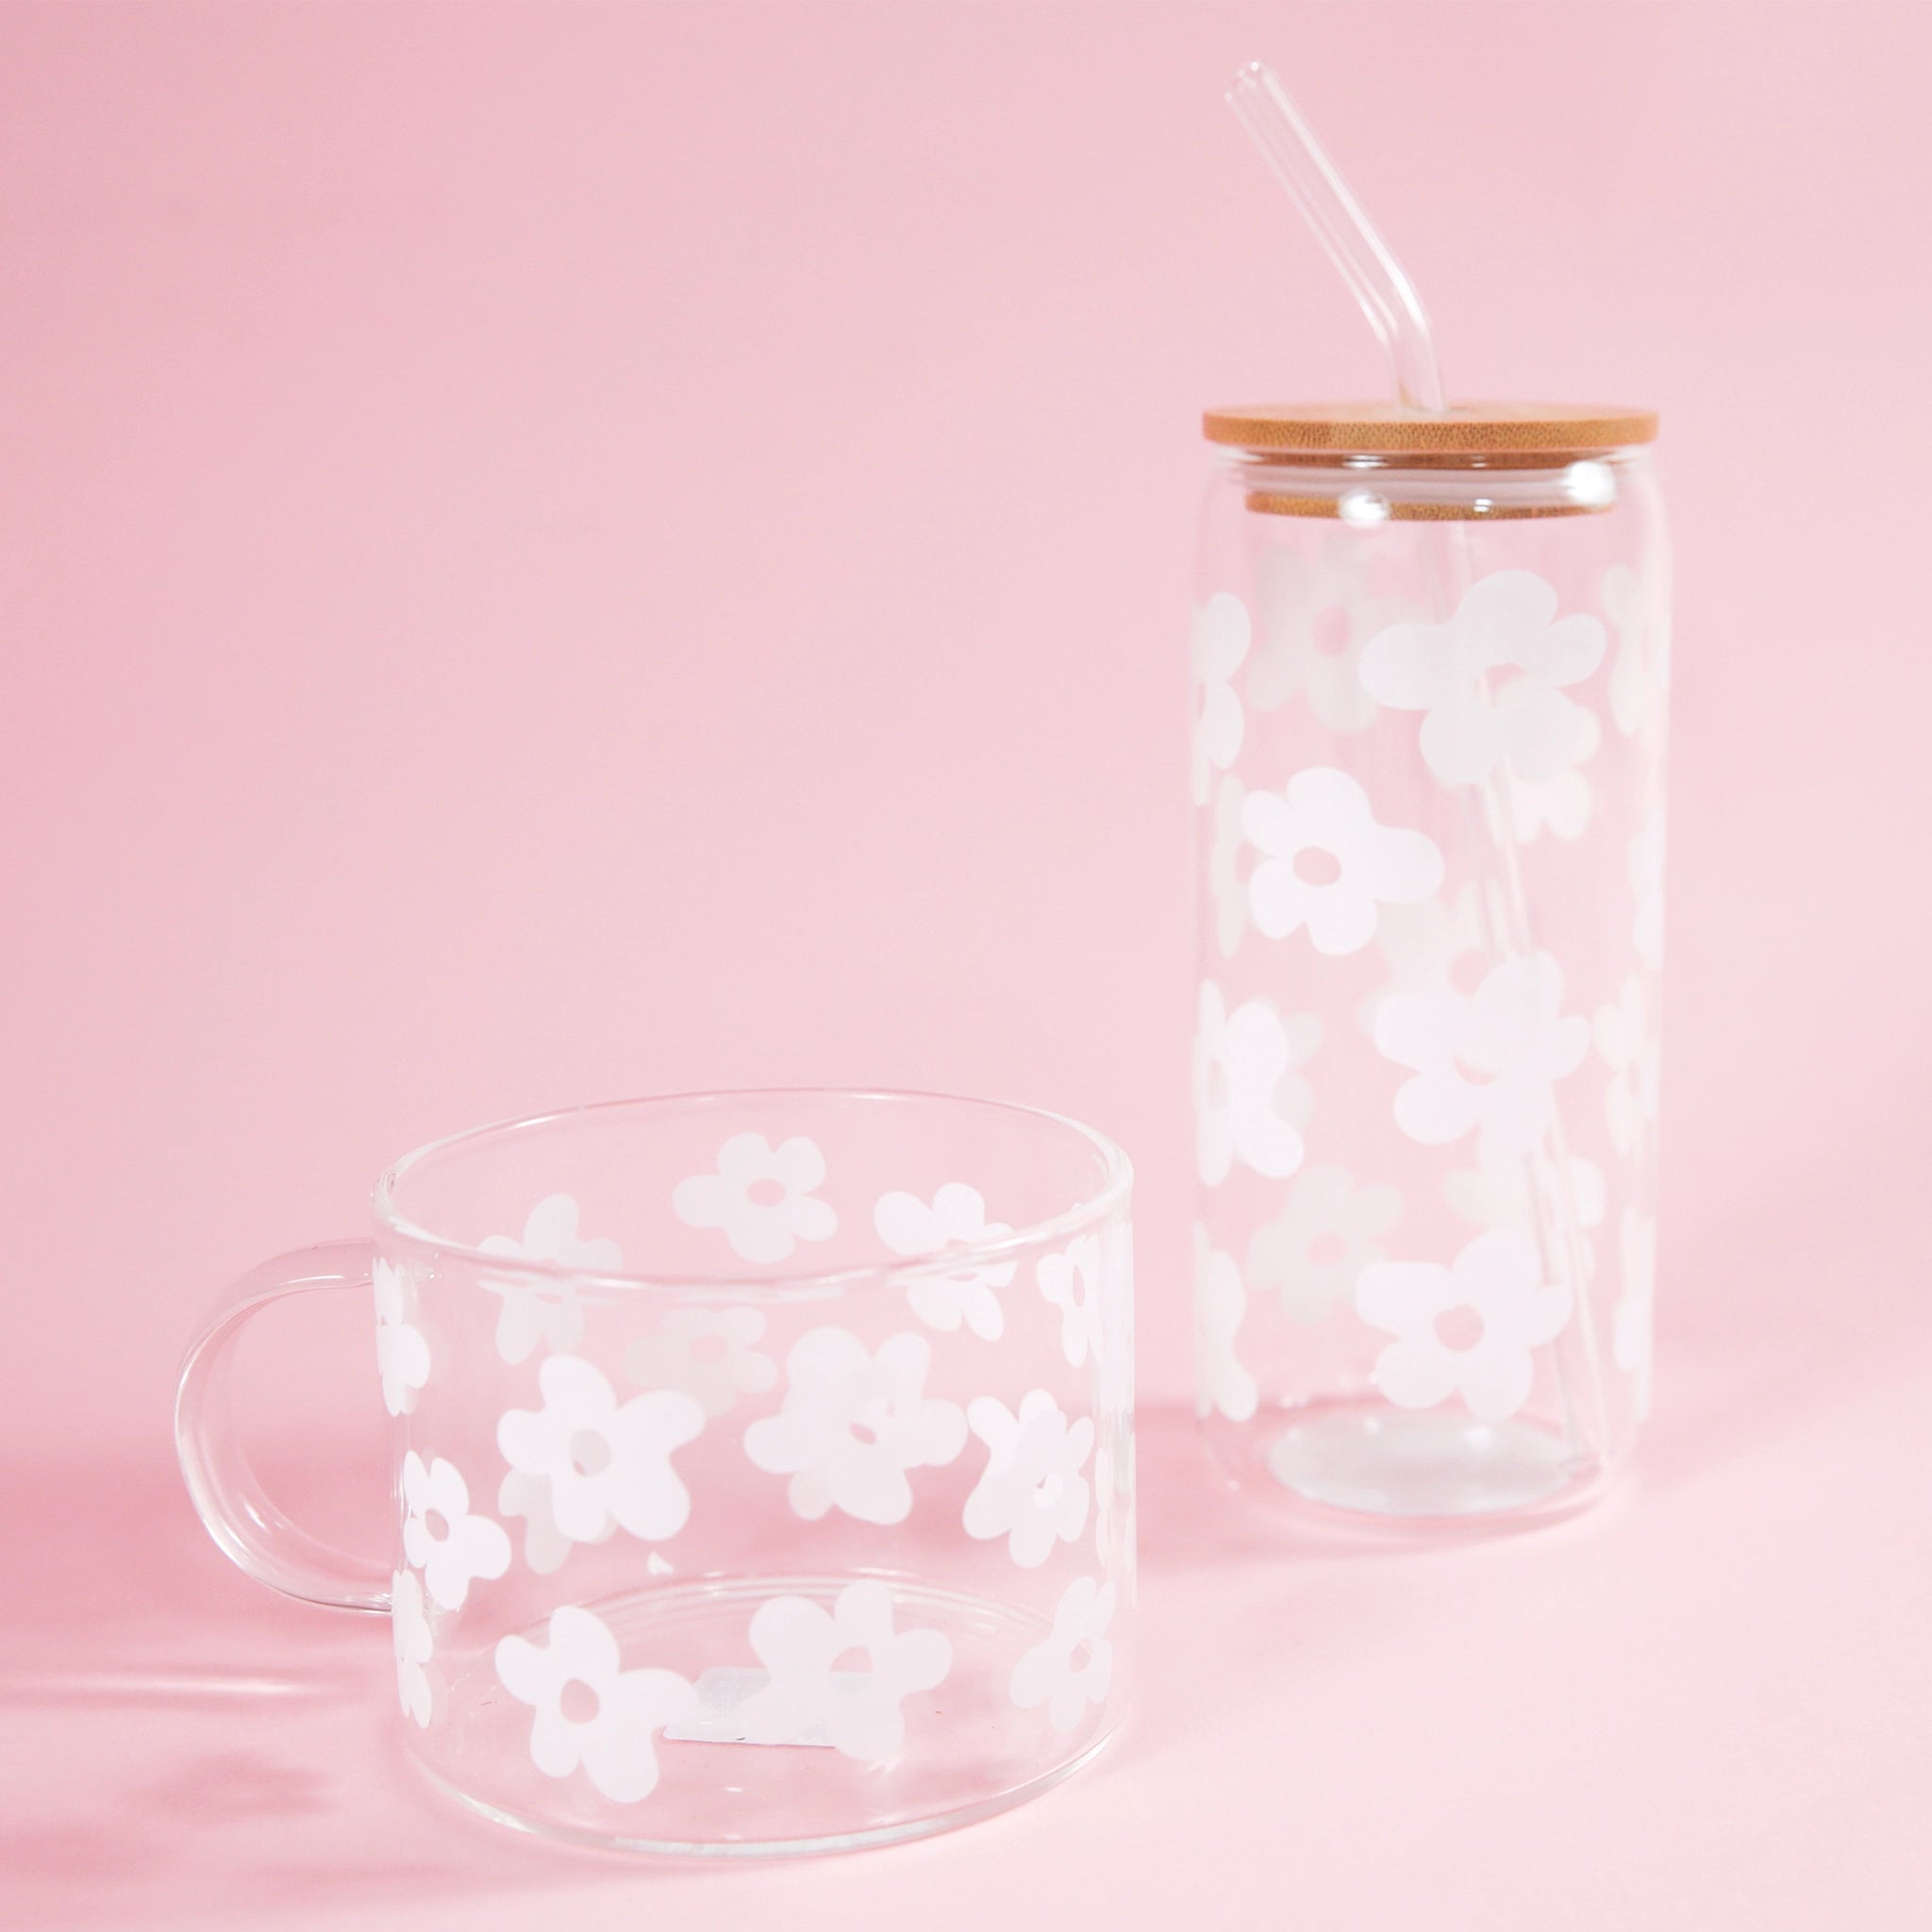 On a light pink background is a clear glass tumbler with a wood lid, a glass straw and white daisy designs all over, photographed next to a glass mug with the same white daisy design that we also carry on our website. 